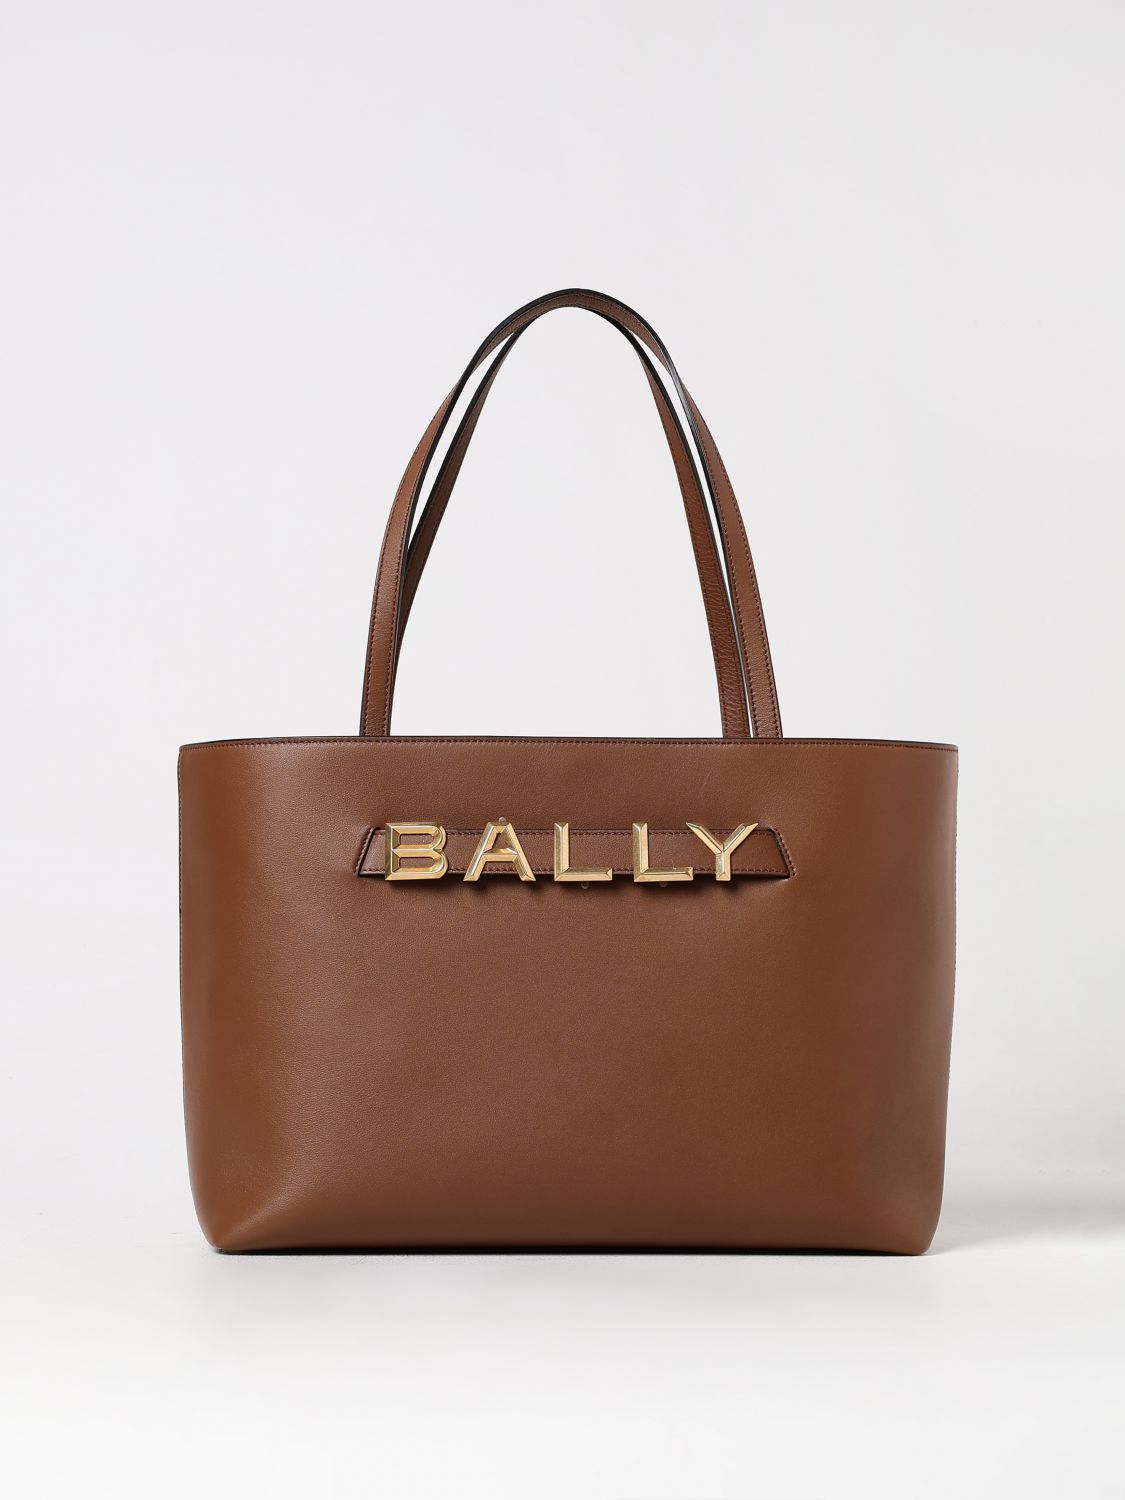 BALLY Tote Bags BALLY Woman color Leather